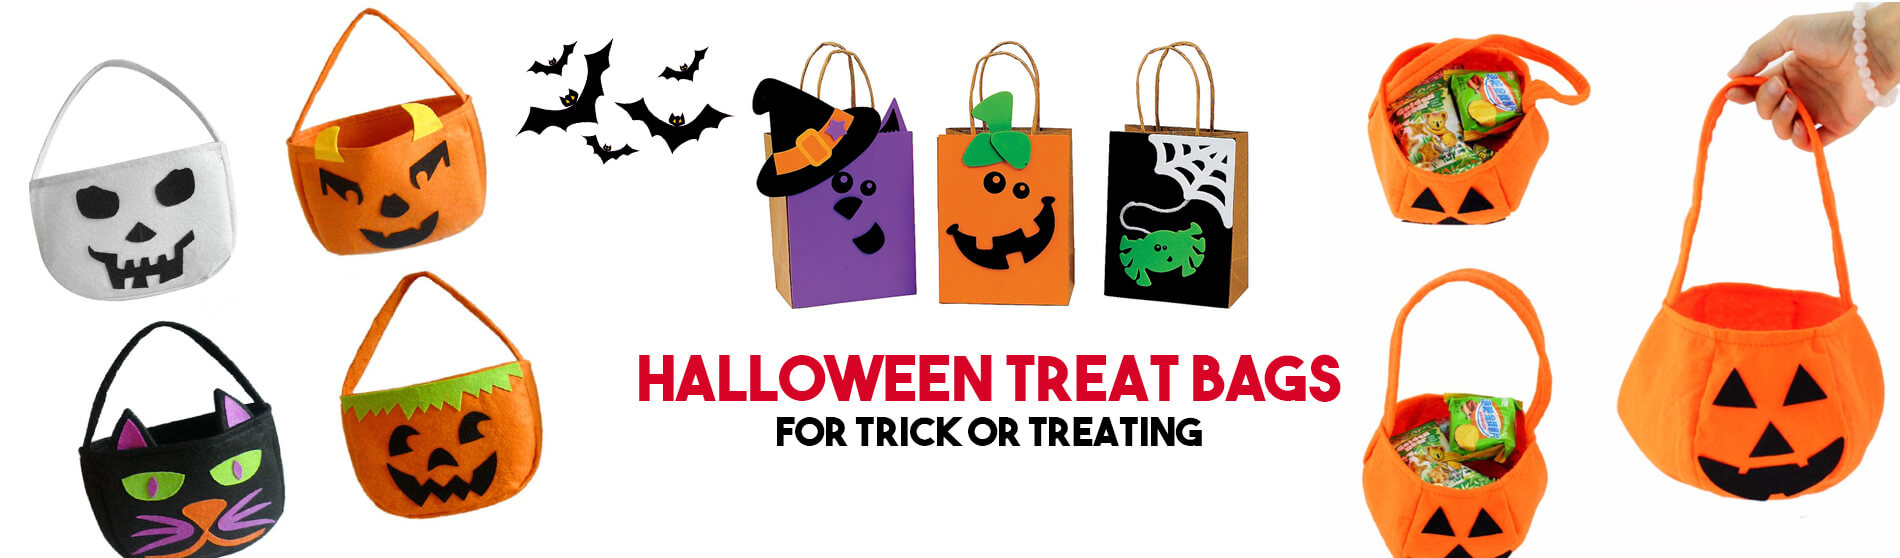 Glendale Halloween : Halloween-Treat-Bags-For-Trick-Or-Treating